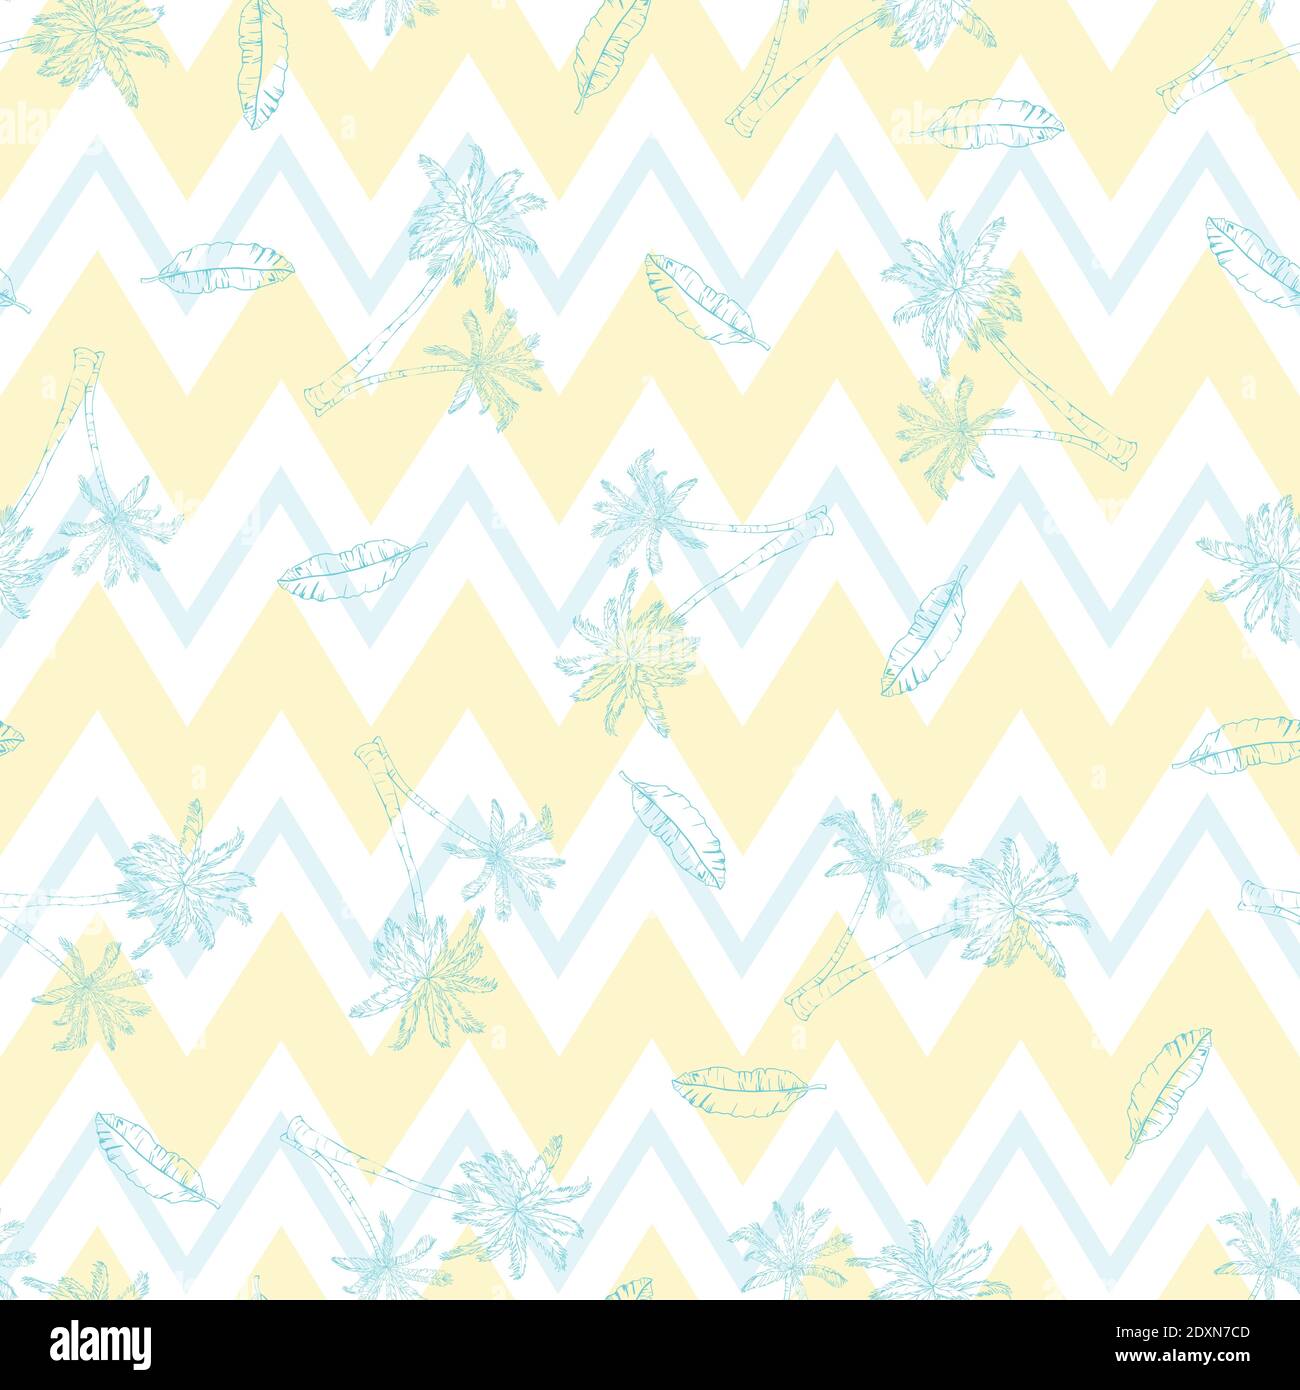 Vector seamless pattern with palm trees Stock Vector